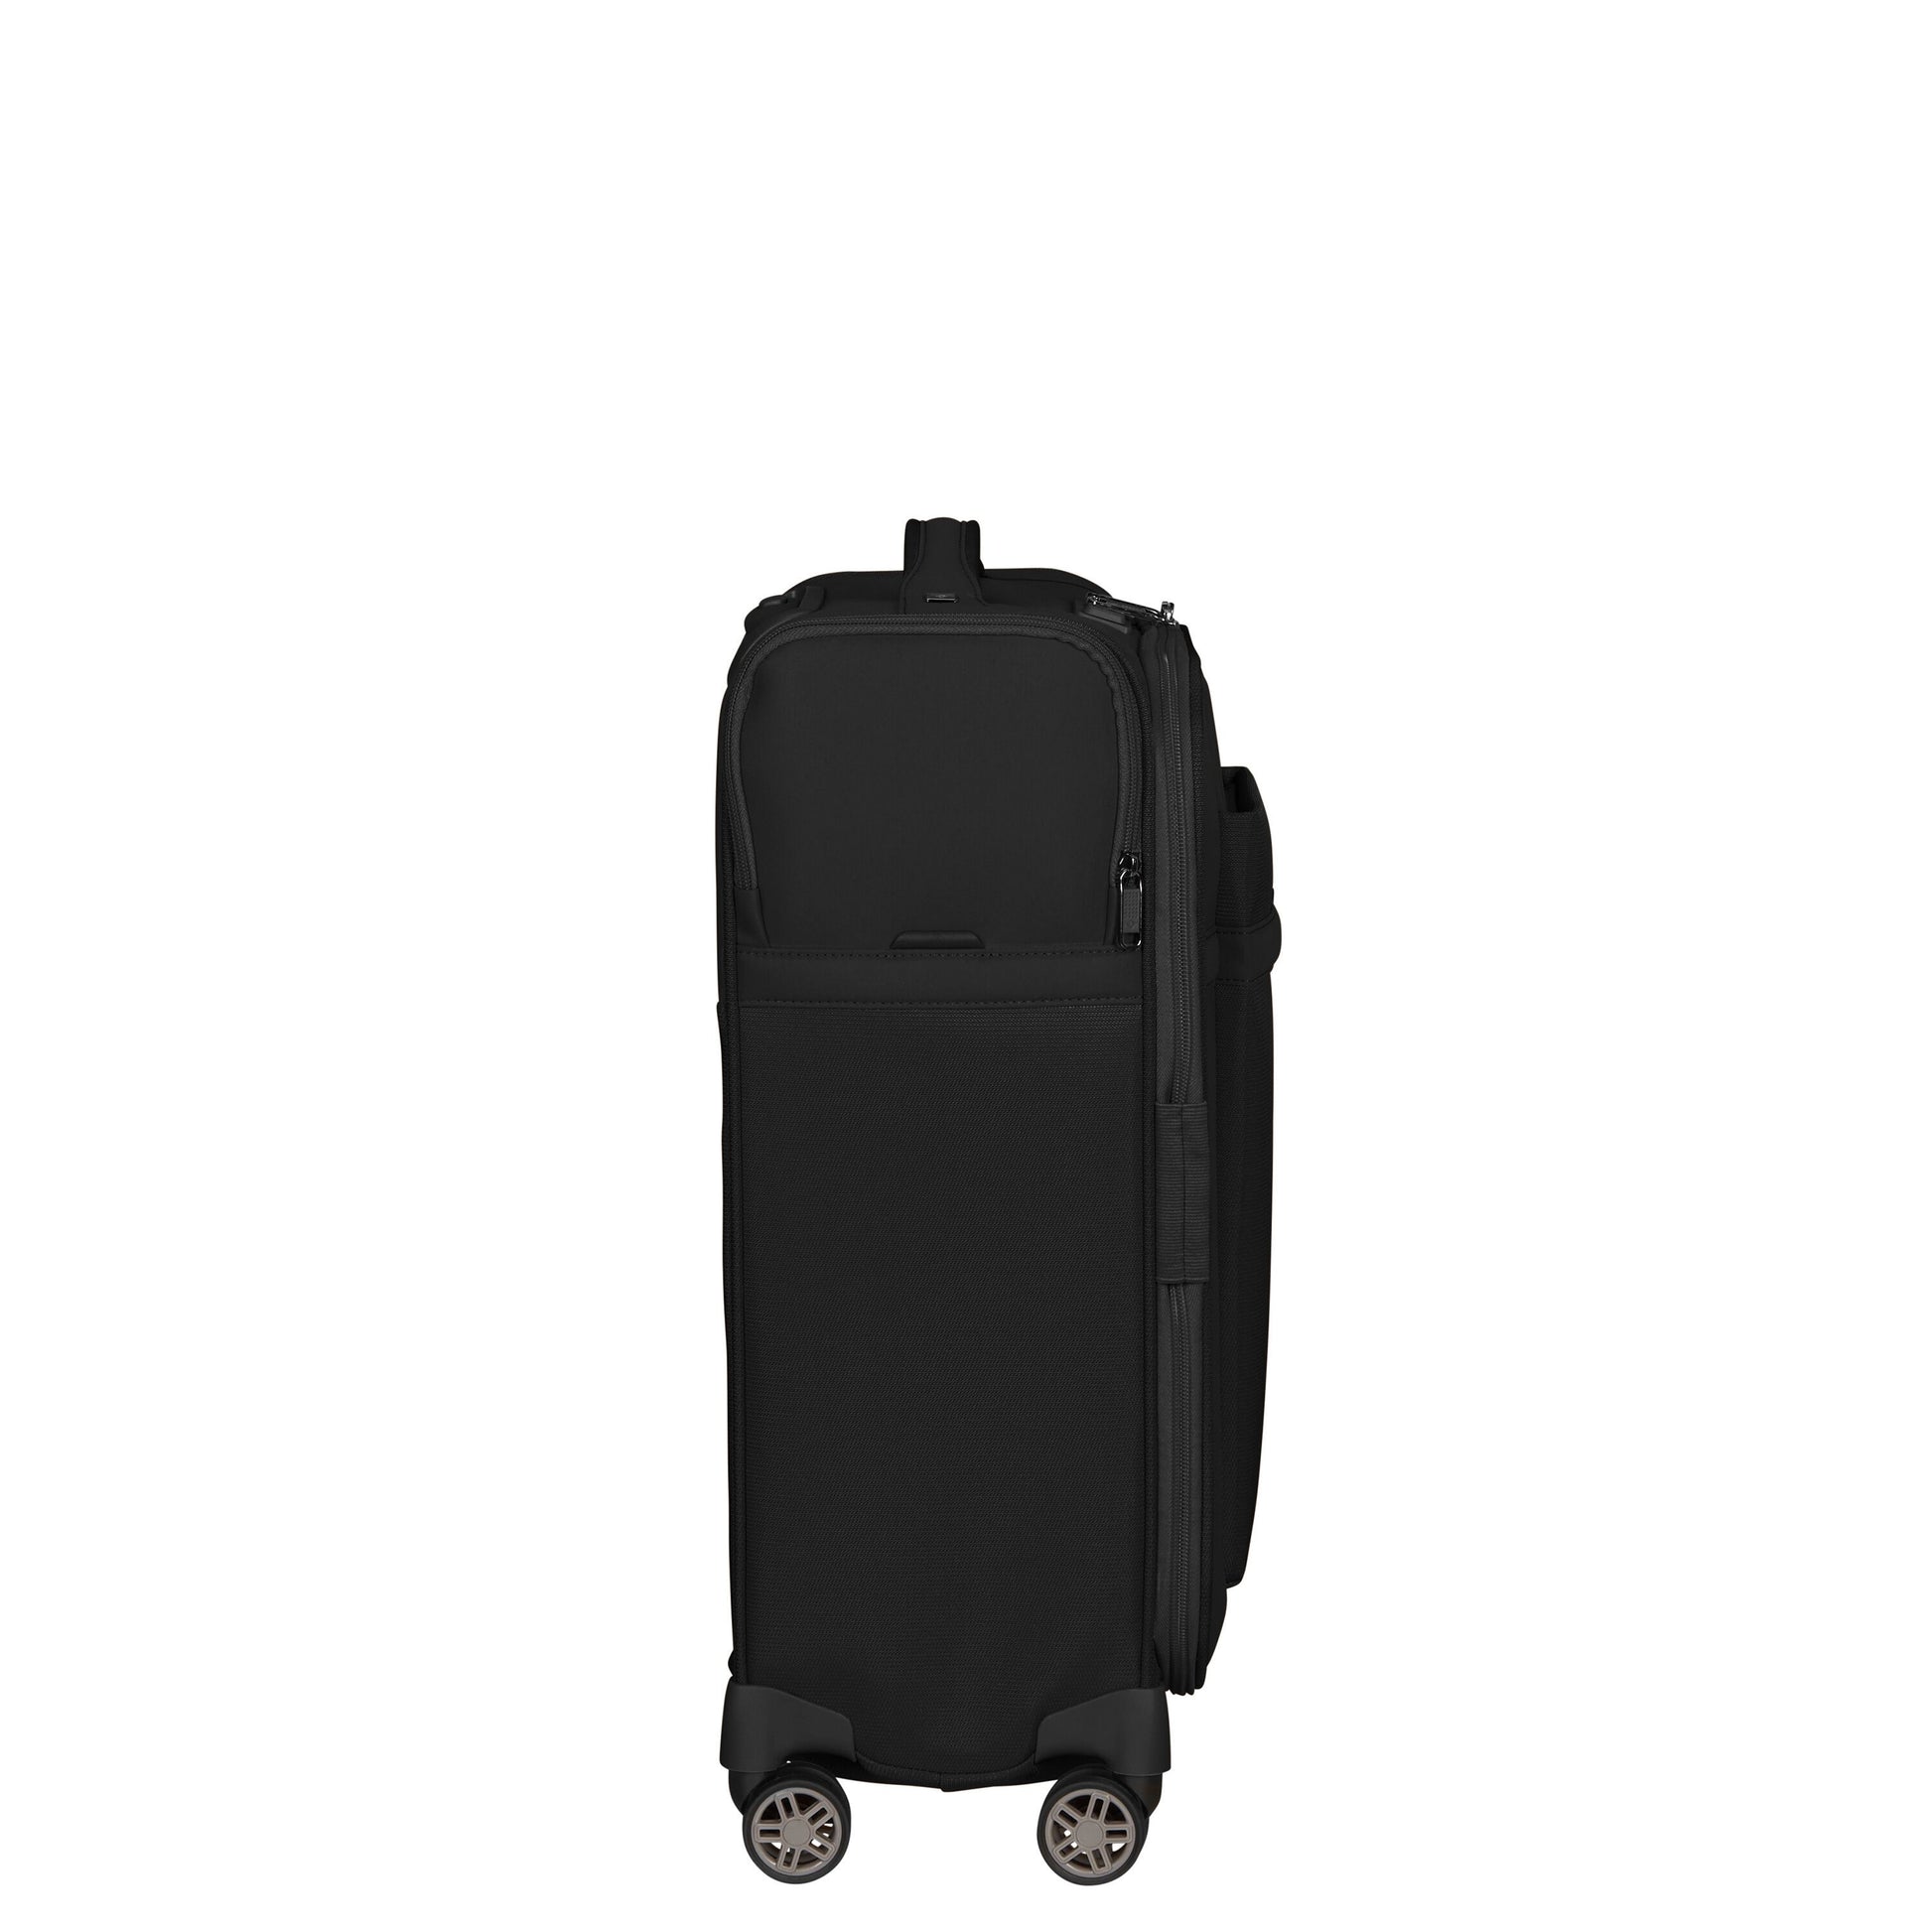 Samsonite Airea Spinner Carry-On Luggage